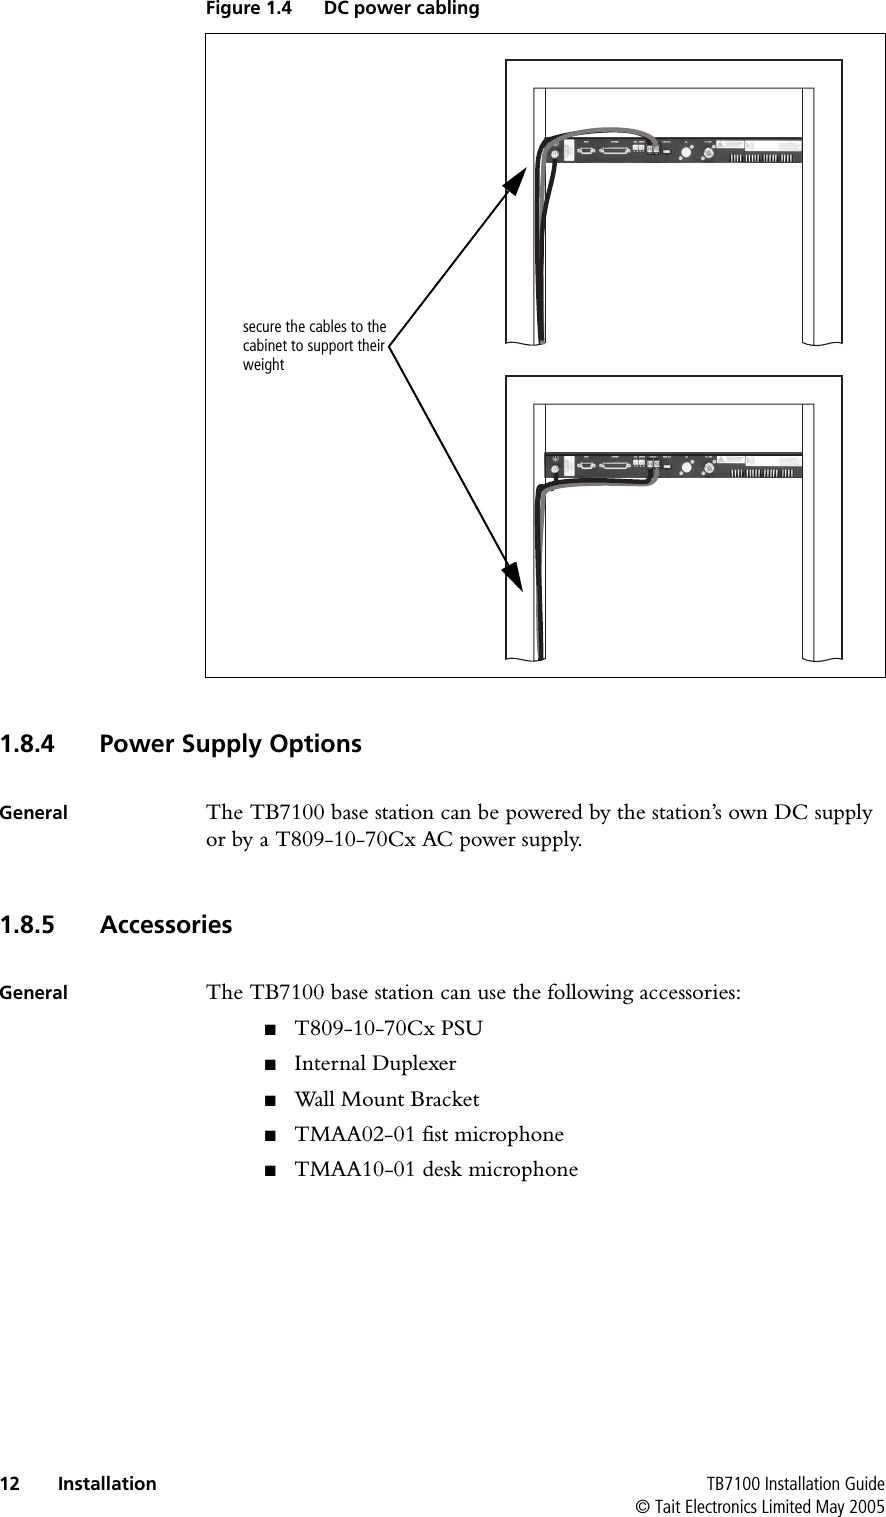  12 Installation TB7100 Installation Guide© Tait Electronics Limited May 2005  1.8.4 Power Supply OptionsGeneral The TB7100 base station can be powered by the station’s own DC supply or by a T809-10-70Cx AC power supply.1.8.5 AccessoriesGeneral The TB7100 base station can use the following accessories:■T809-10-70Cx PSU■Internal Duplexer■Wall Mount Bracket■TMAA02-01 fist microphone■TMAA10-01 desk microphoneFigure 1.4 DC power cablingsecure the cables to the cabinet to support their weight